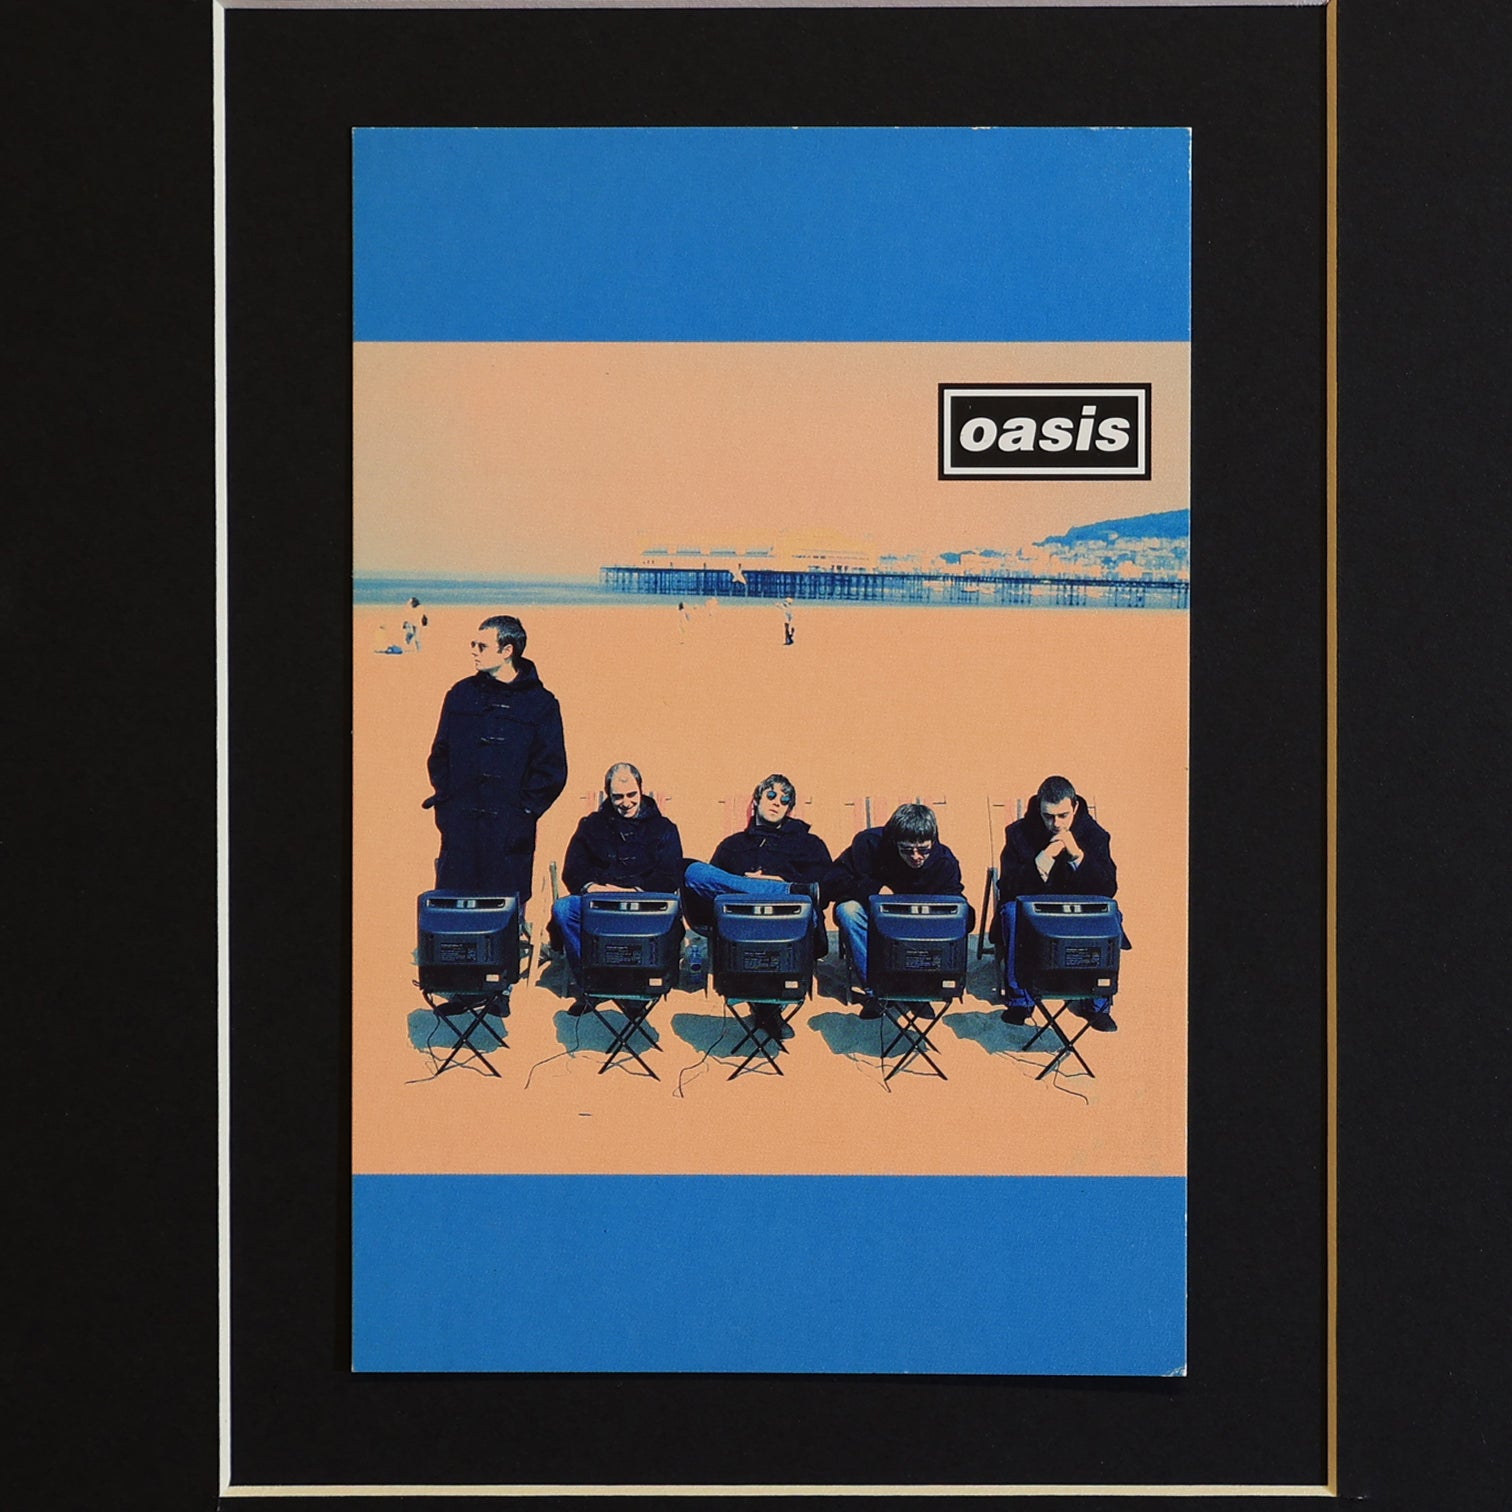 Oasis - Original 1995 'Roll With It' Framed Promo Postcard - New Item